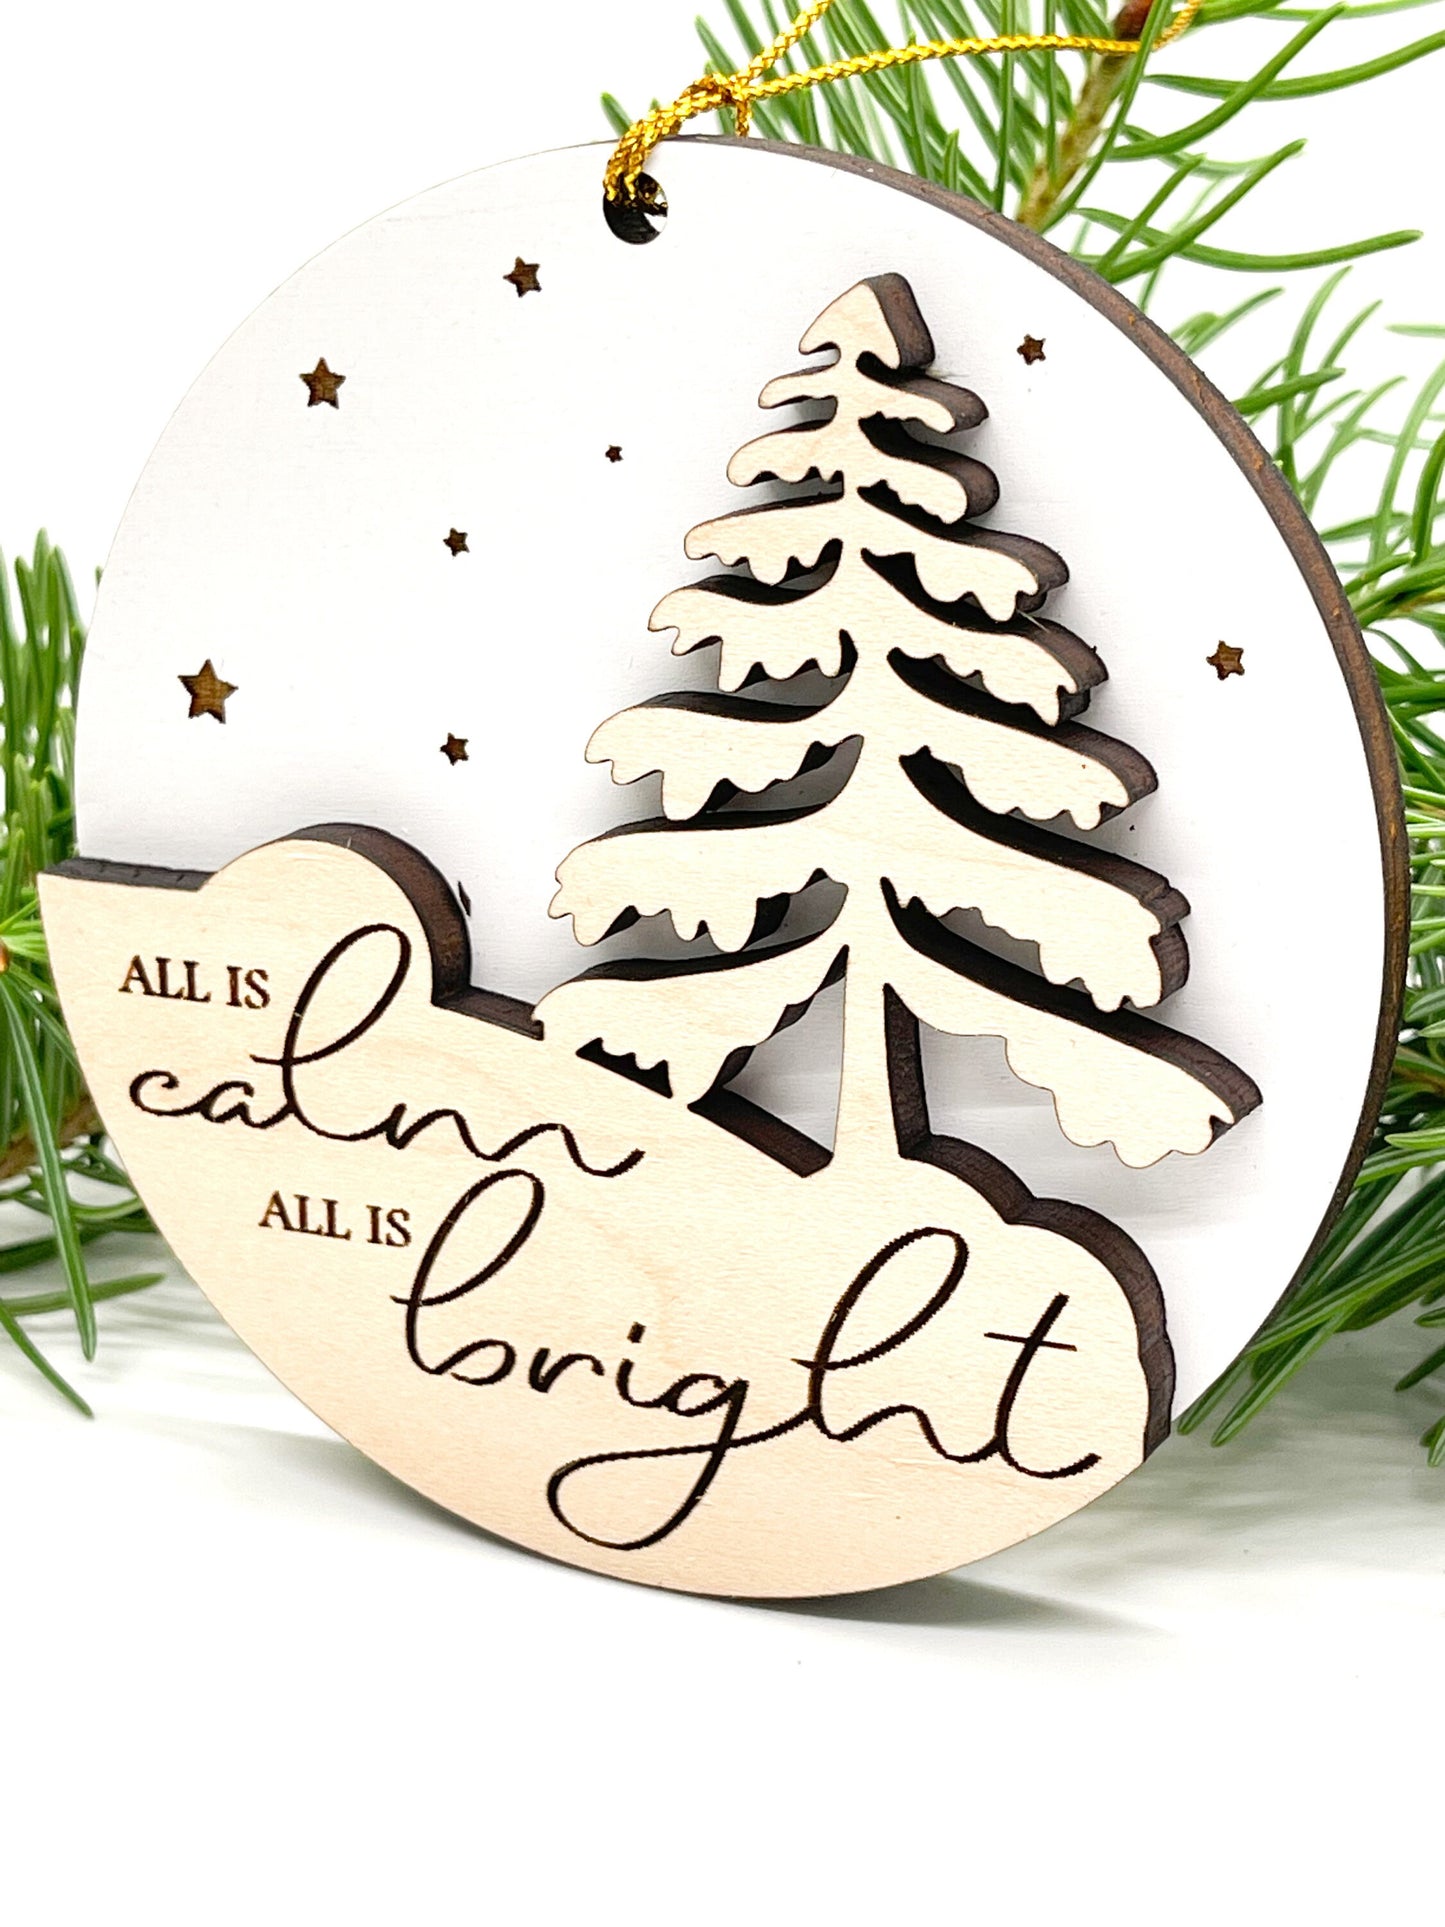 All is Calm All is Bright Ornament | Christmas Ornament | Silent Night Ornament